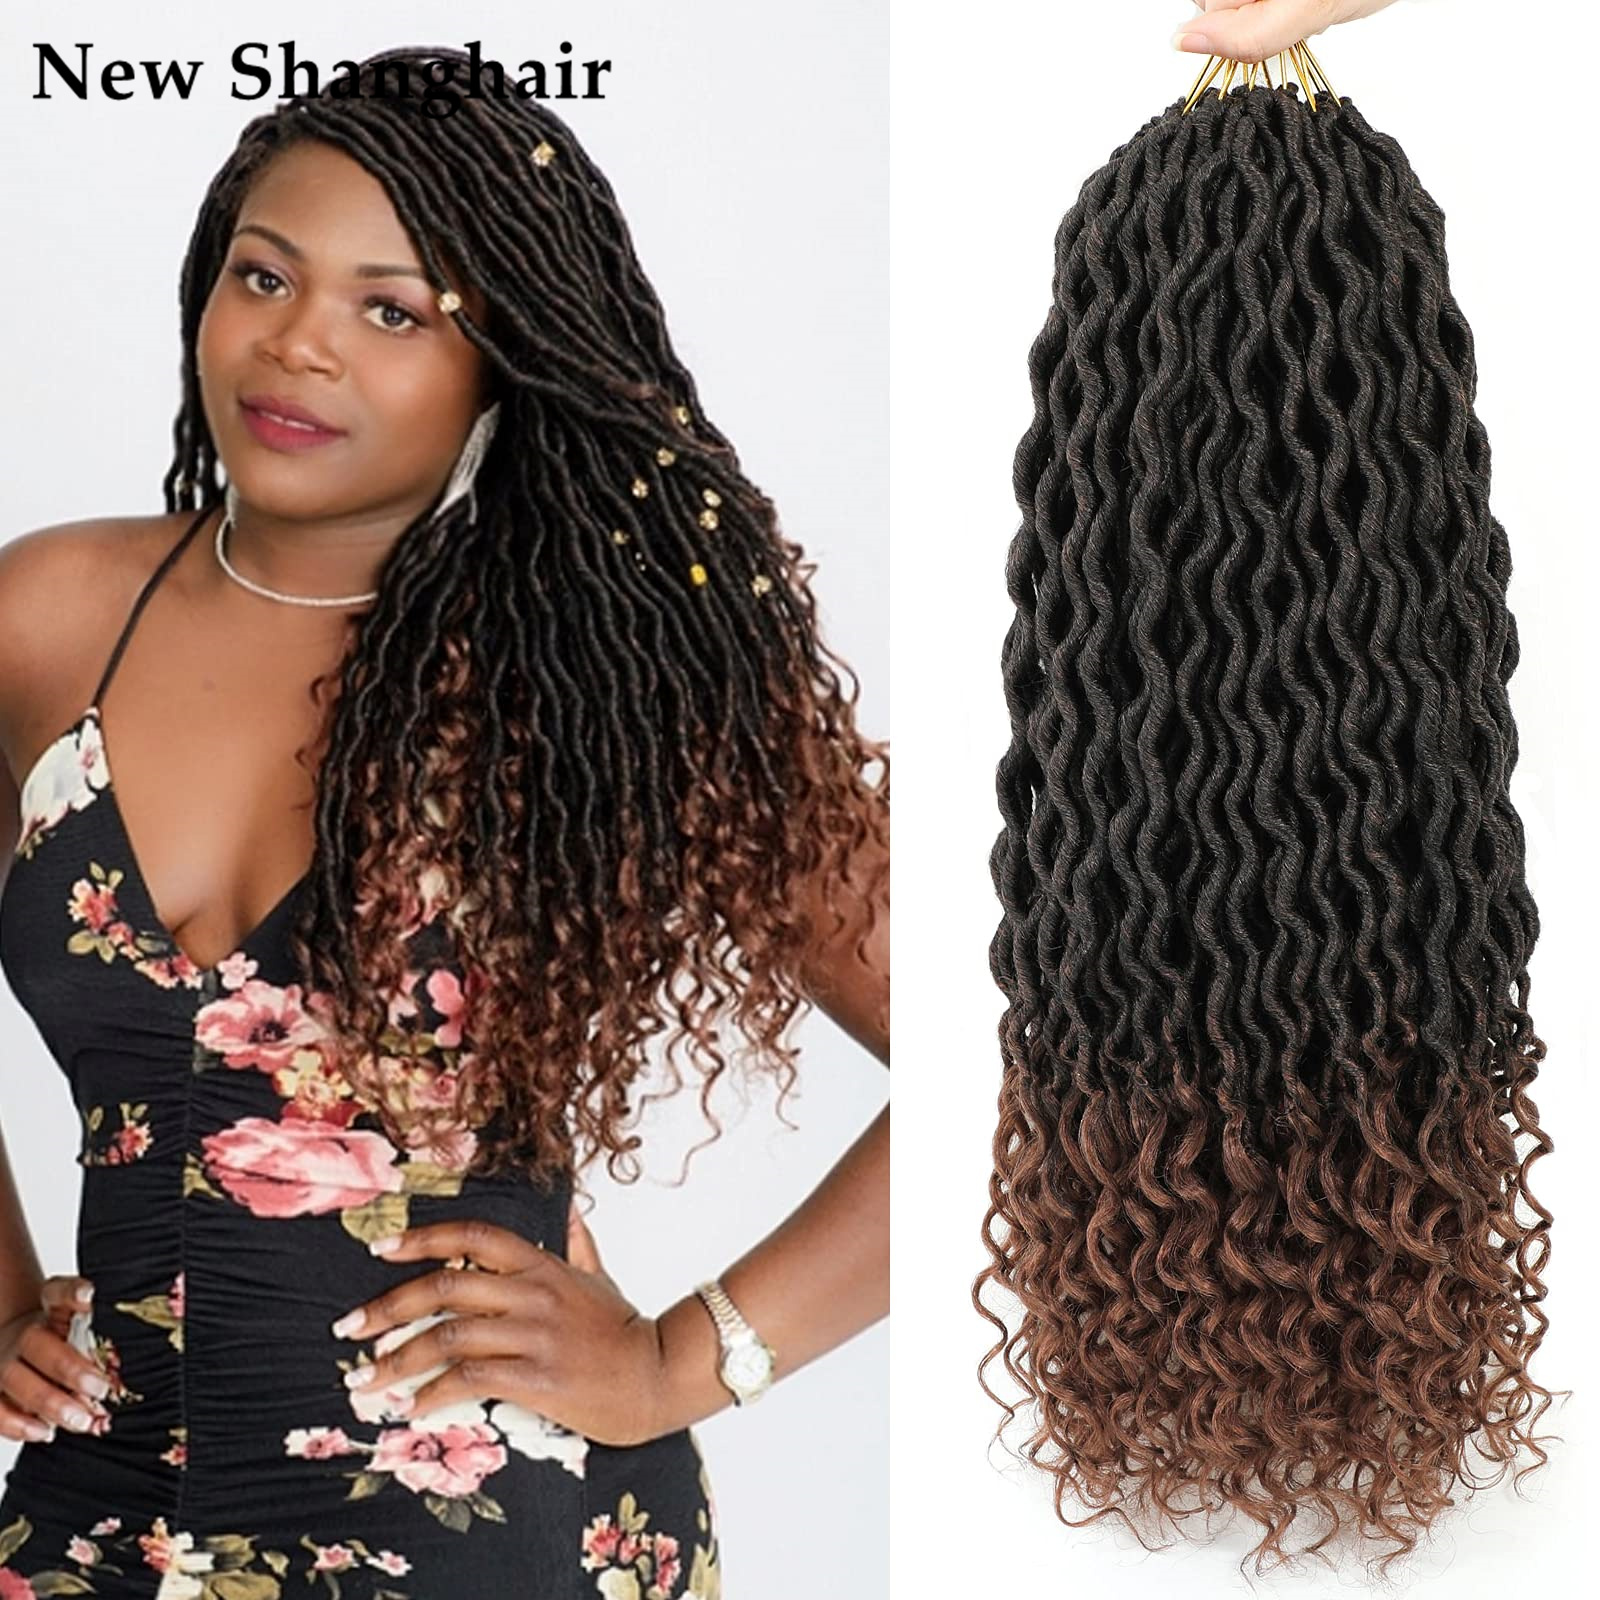 

Wavy Faux Locs Braids Crochet Hair 18 inch Ombre Purple Blue Braiding Goddess with Curly Ends Synthetic Twist Hair Extensions BS12, 1b